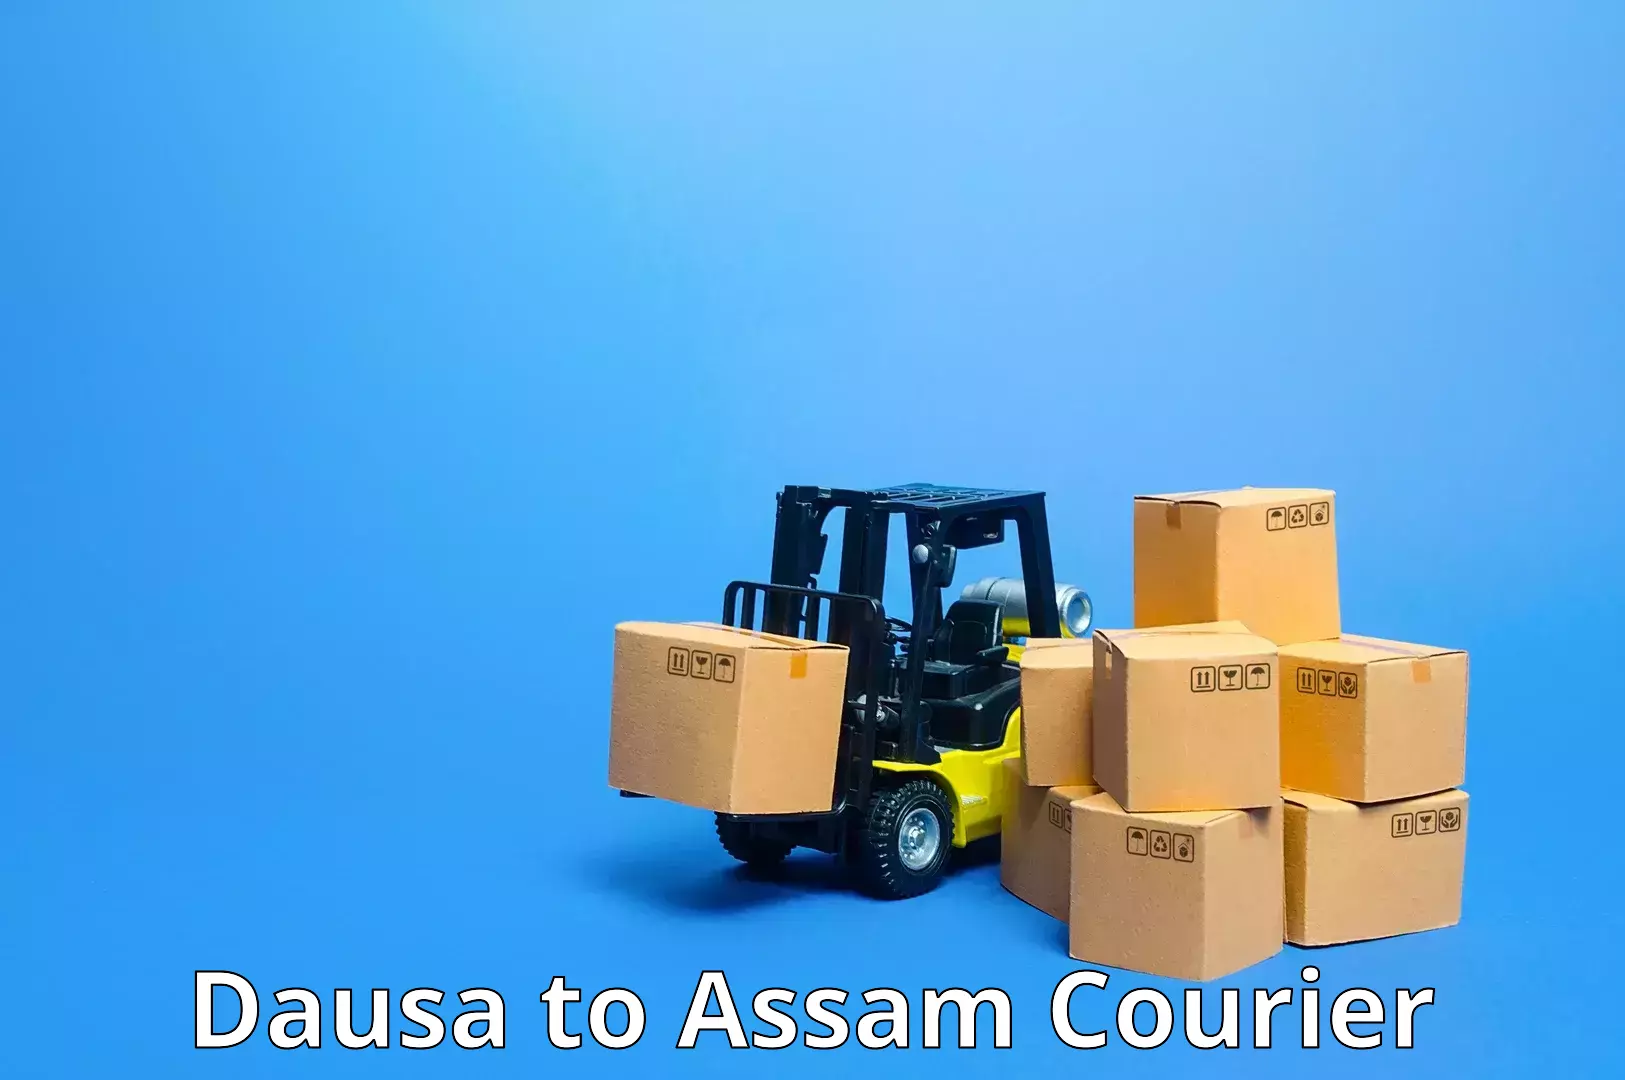 Cash on delivery service Dausa to Assam